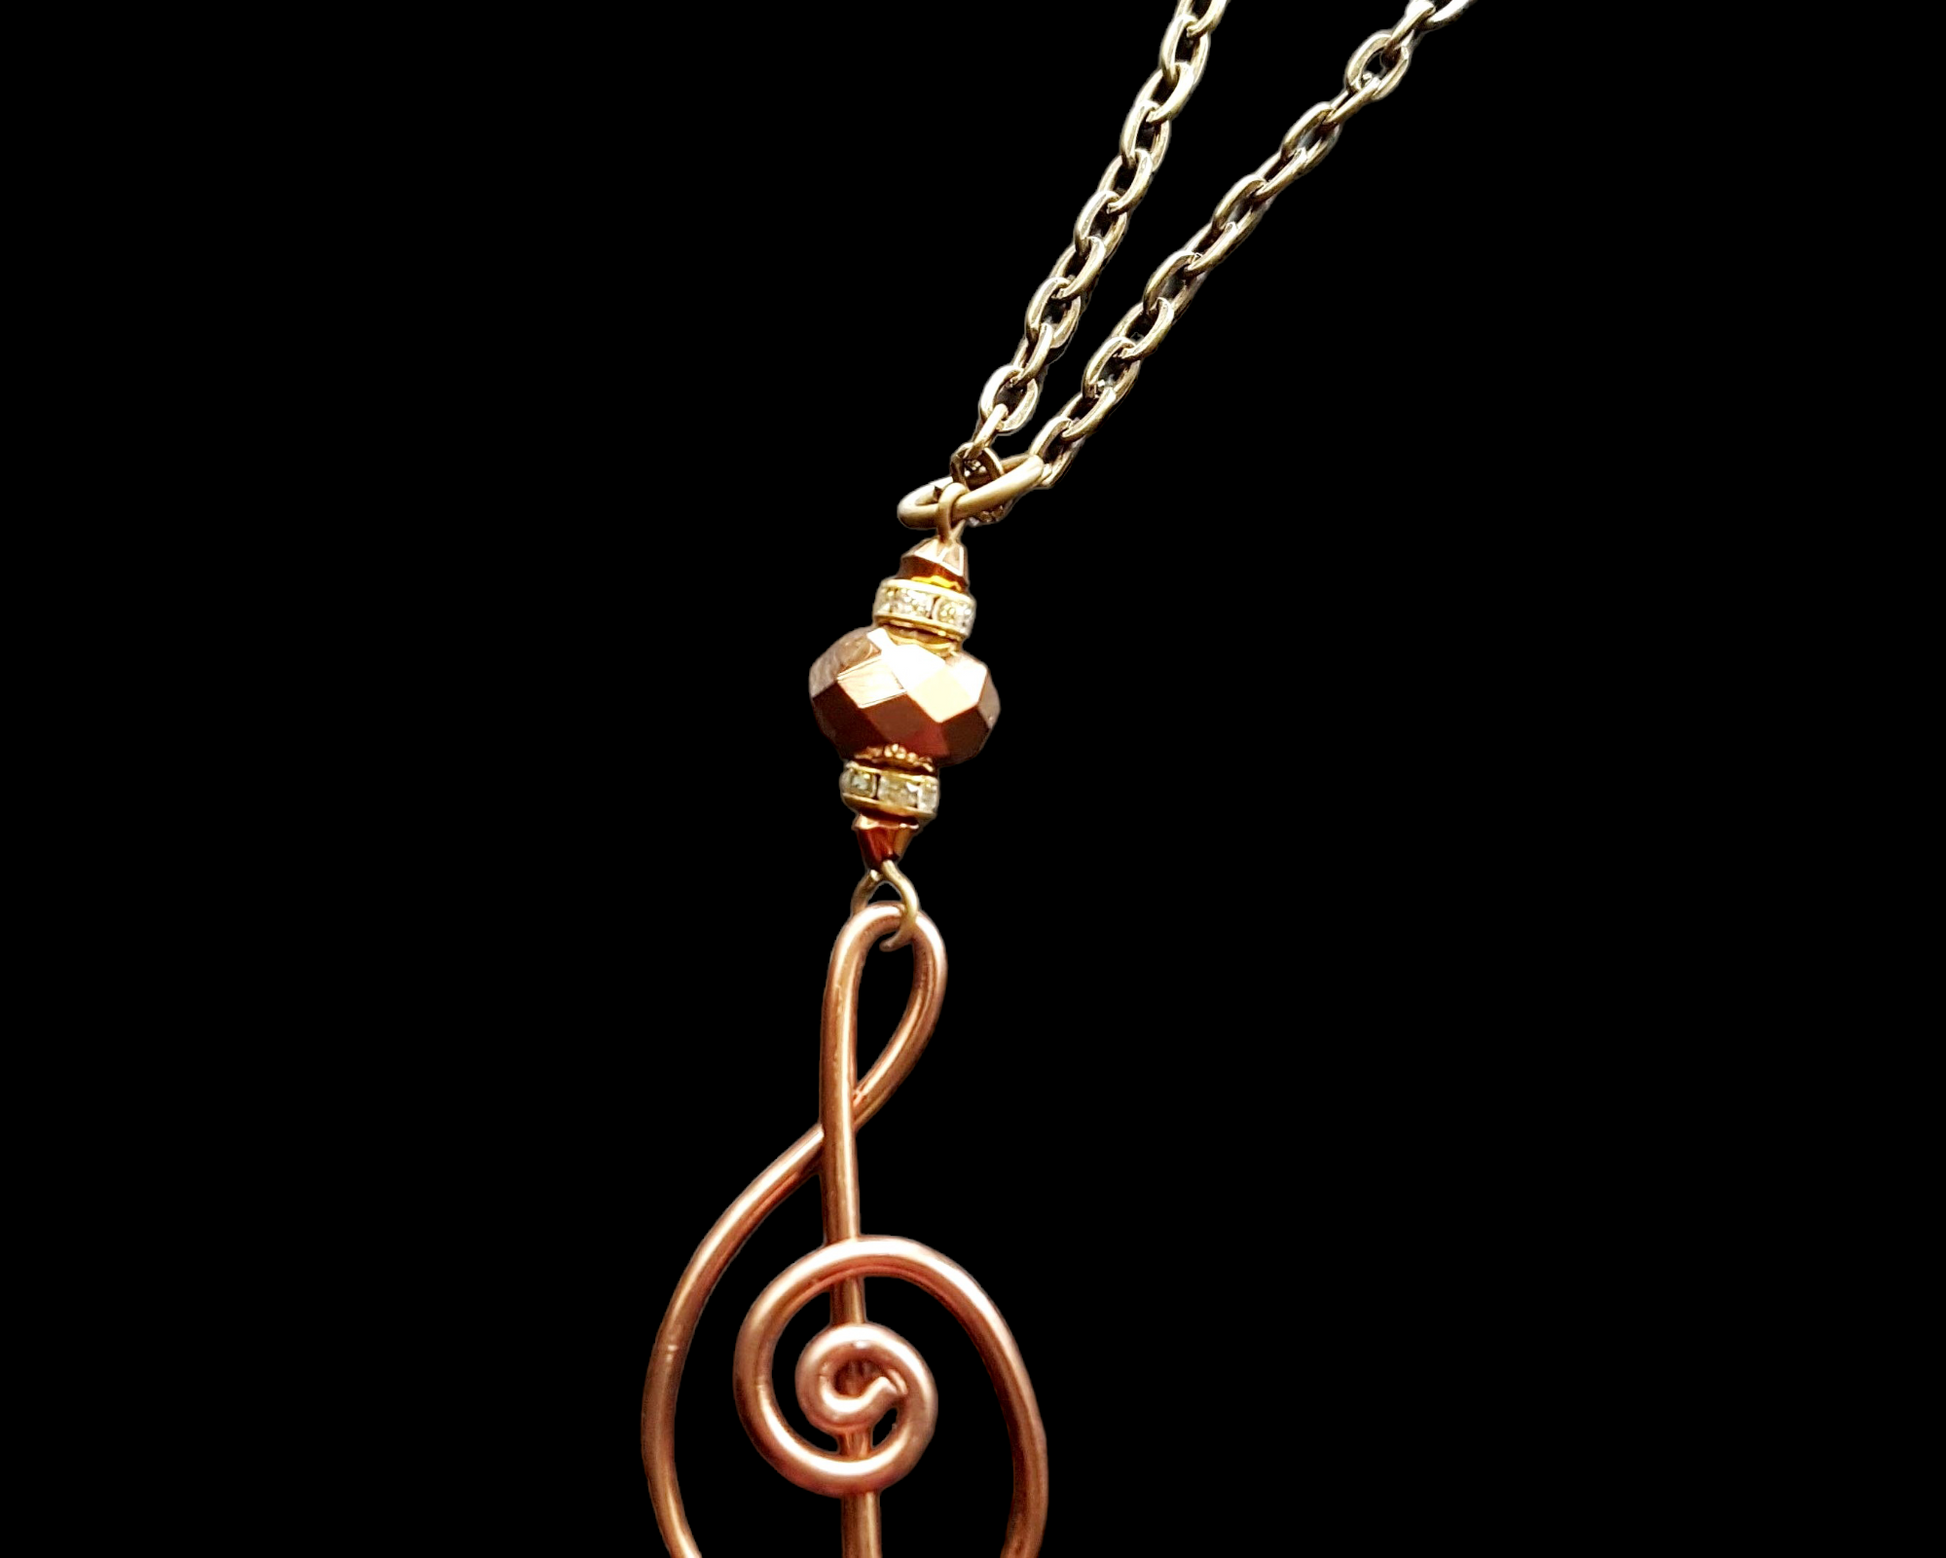 Large Romance Treble Clef Pendant on Long Chain with Bronze Treble cleft, Gold Crystal, on a Long Chain